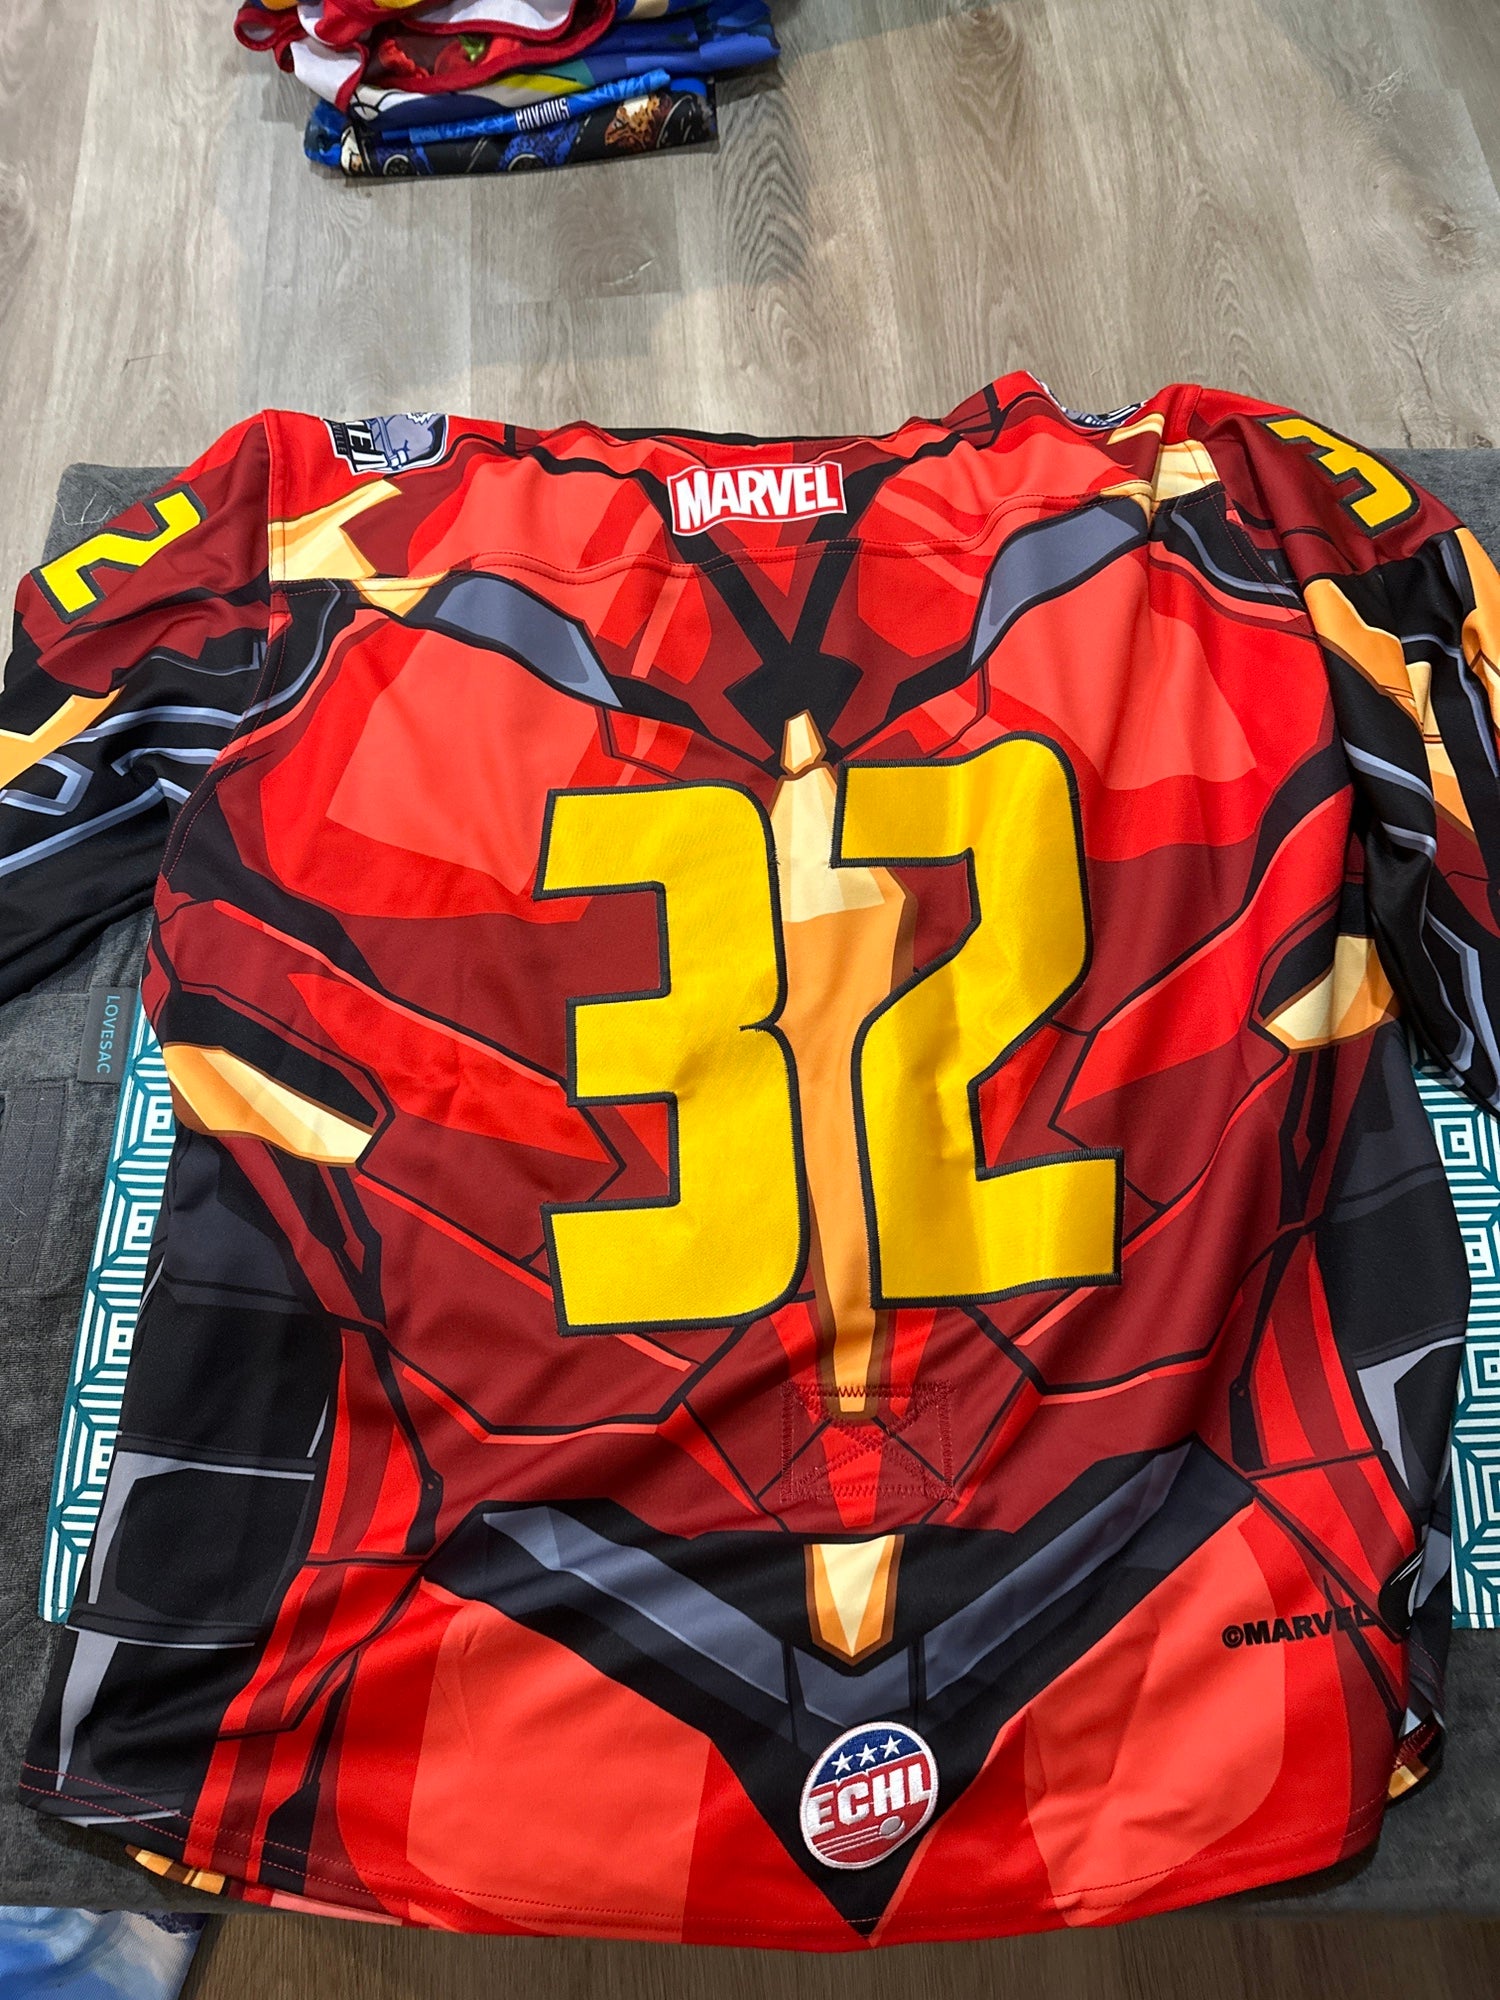 Jacksonville Icemen on X: For the first time ever you can own a matching  themed jersey and glove set – Thanos style! Marvel Super Hero™ Night feat.  Thanos is this Friday and